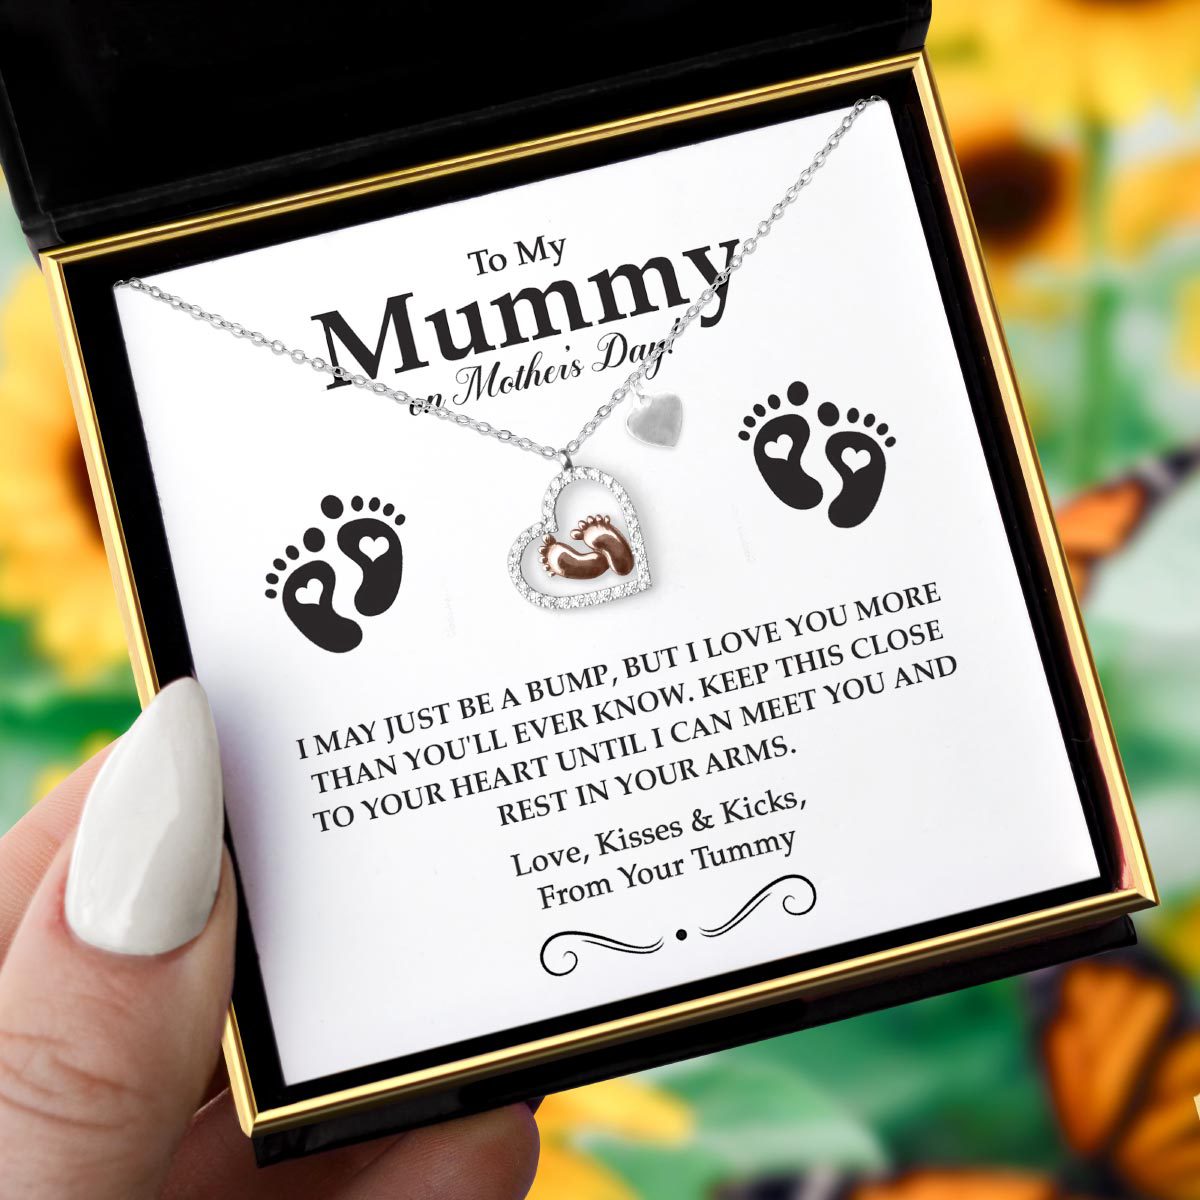 To My Mummy On Mother's Day - Baby Feet Heart Pendant Necklace Gift Set